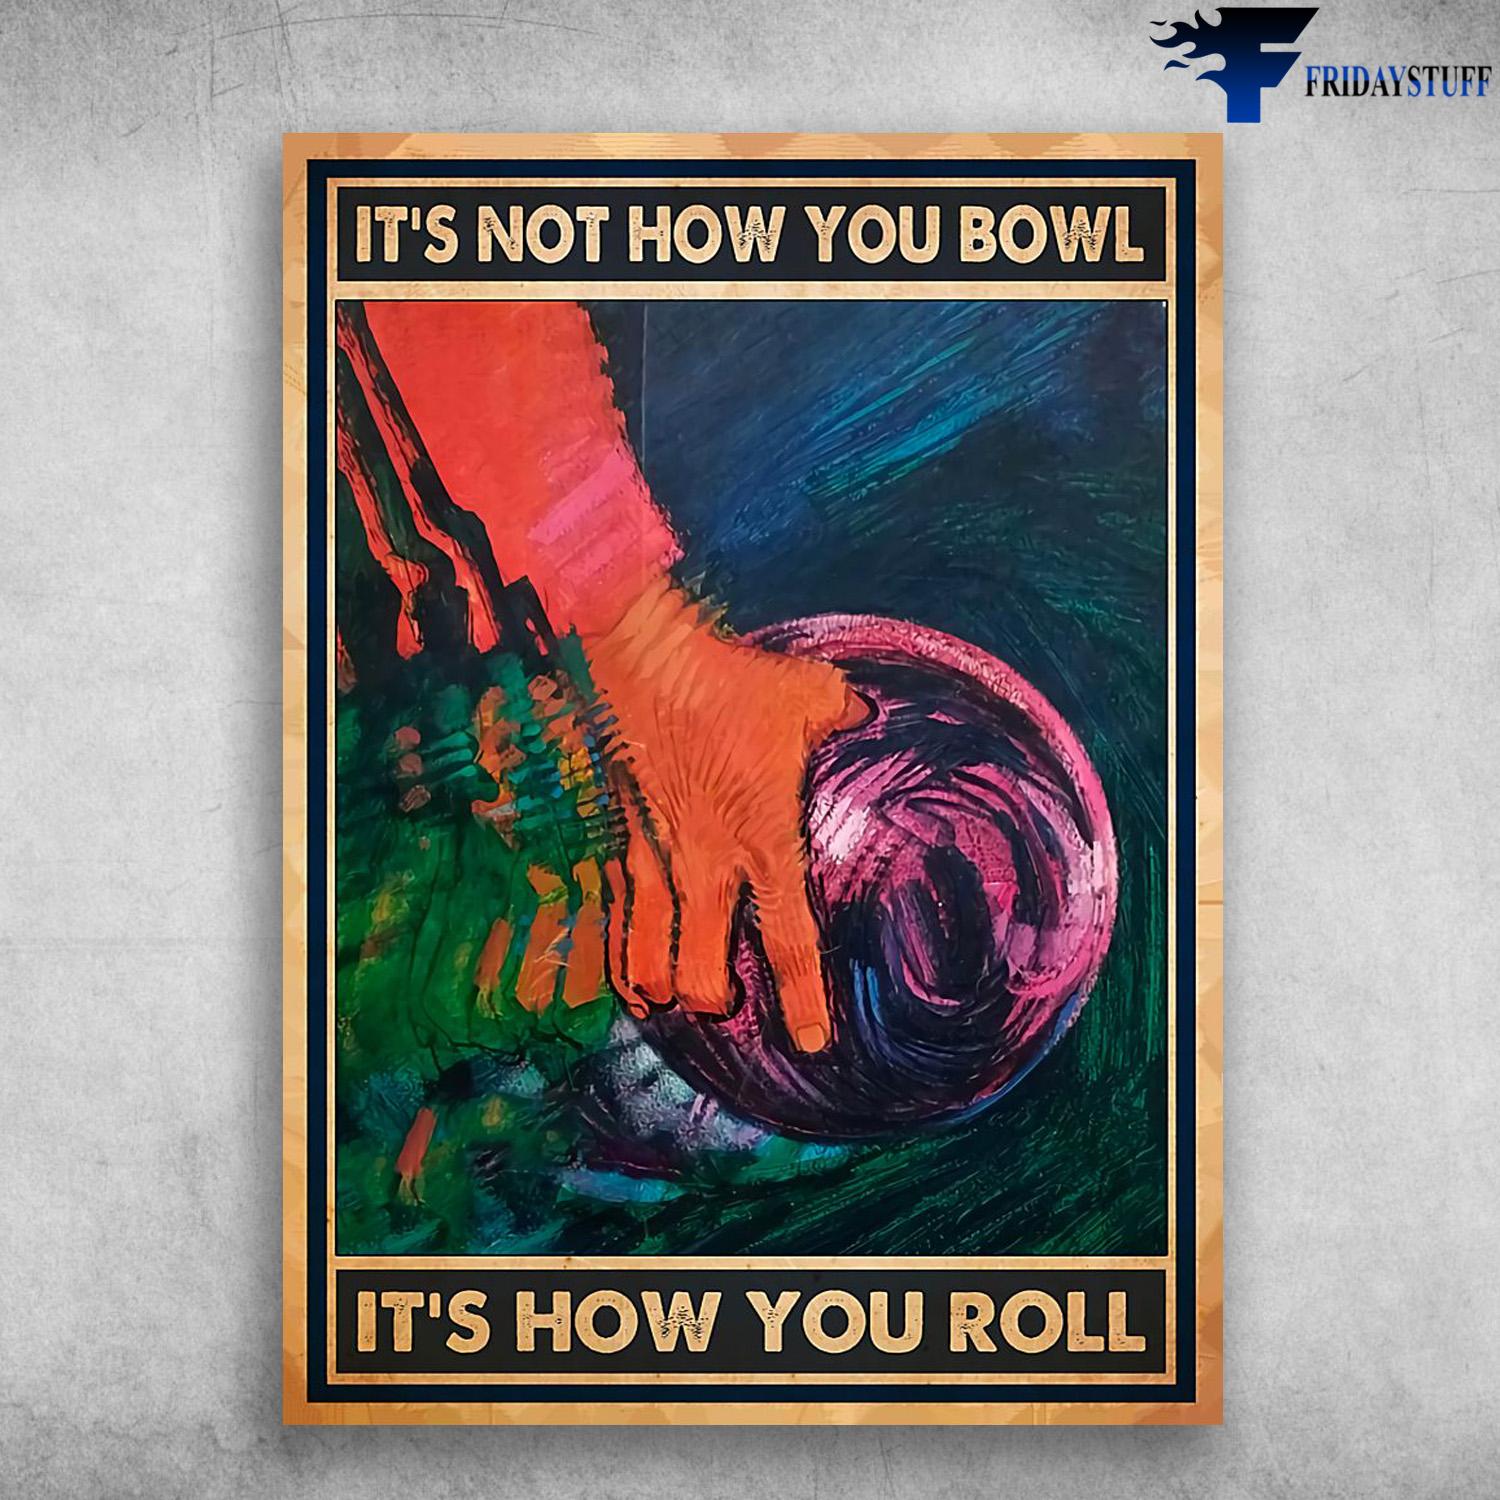 Bowling Lover, Bowling Poster, It's Not How You Bowl, It's How You Roll